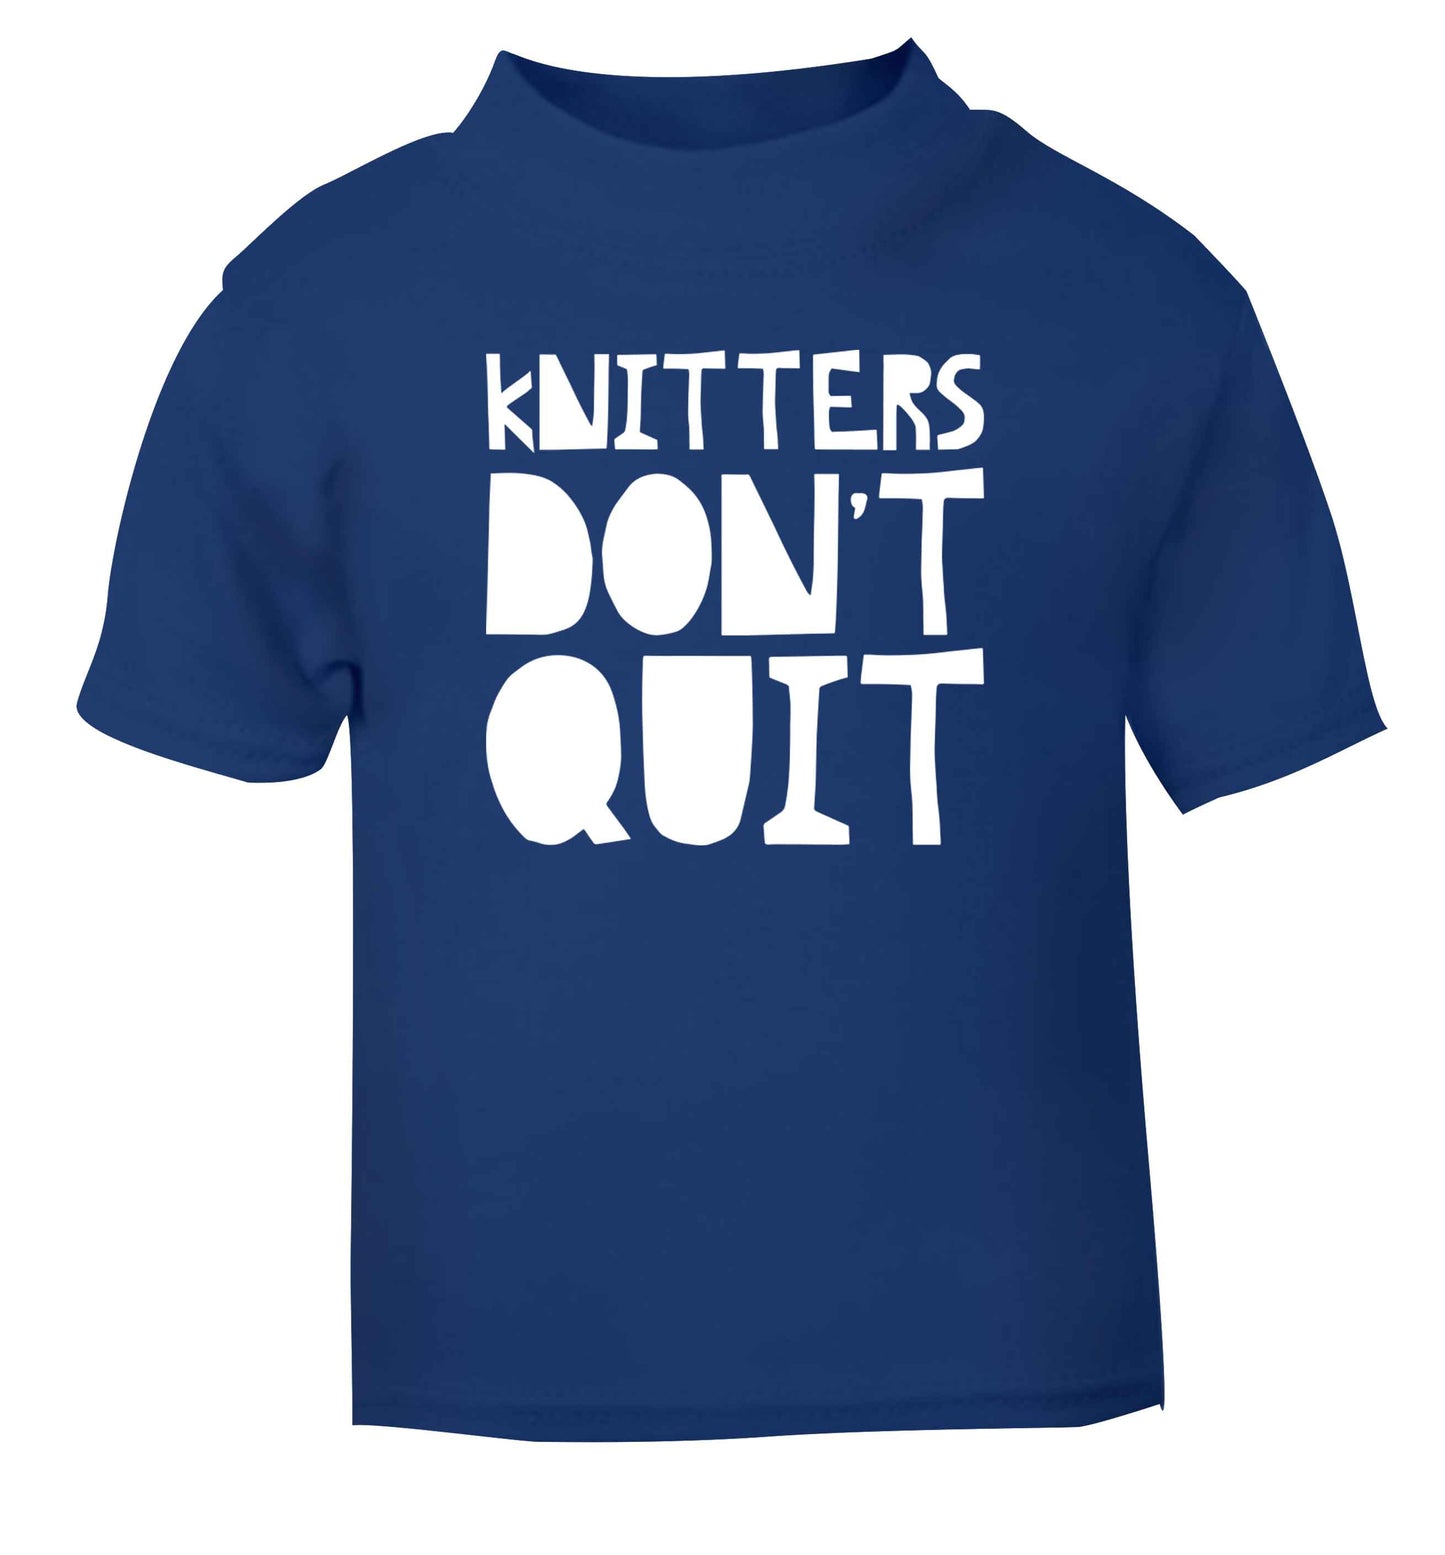 Knitters don't quit blue Baby Toddler Tshirt 2 Years